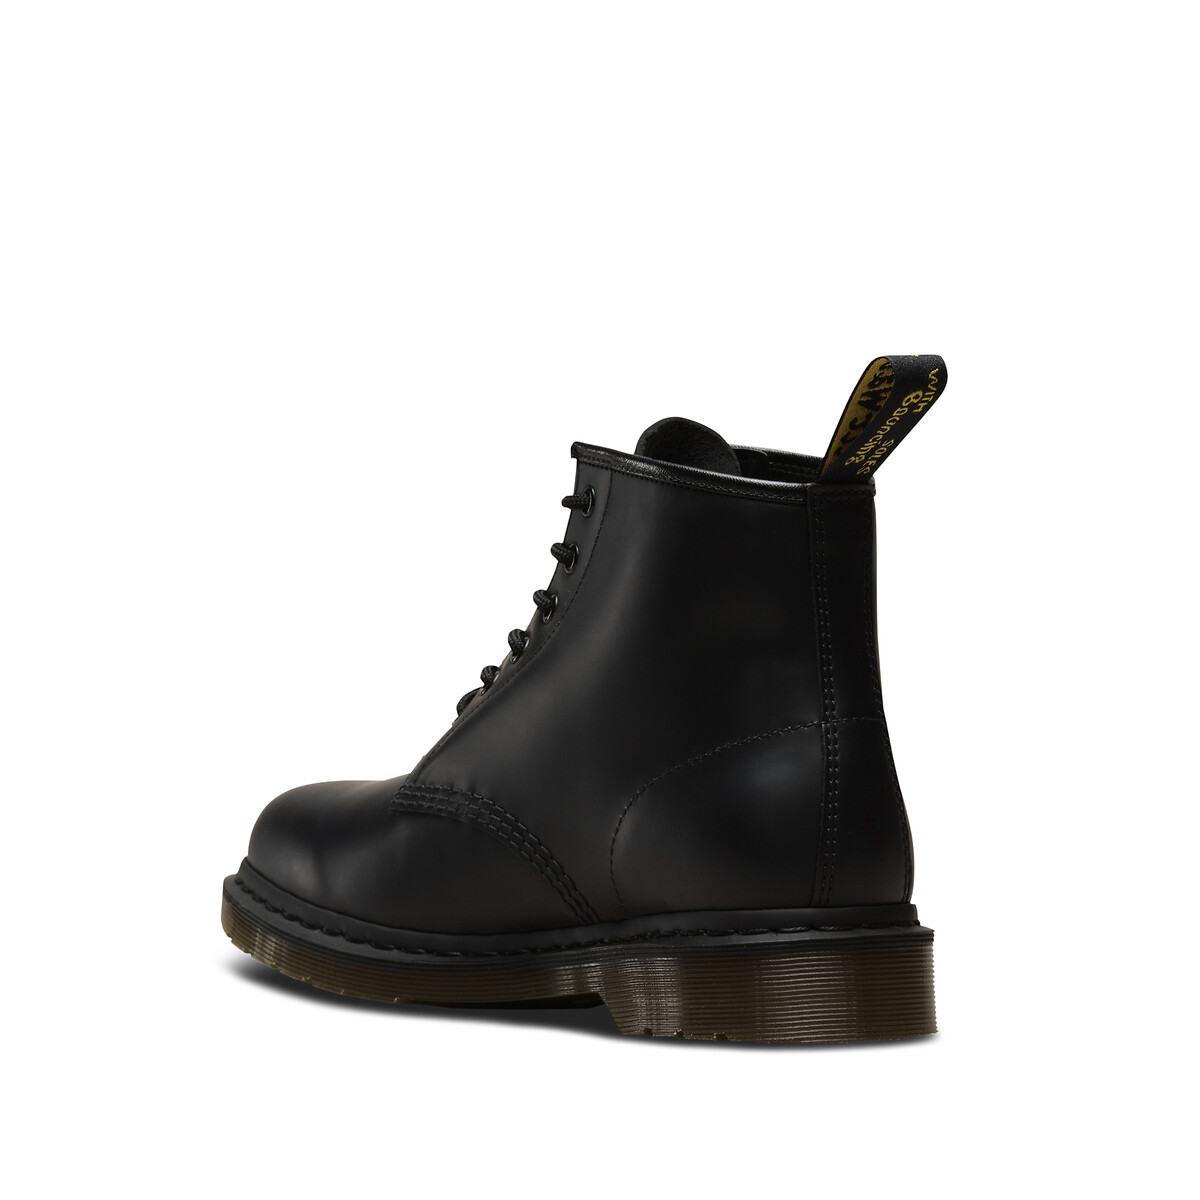 101 Smooth Leather Boots Black Dr. Martens | La Redoute